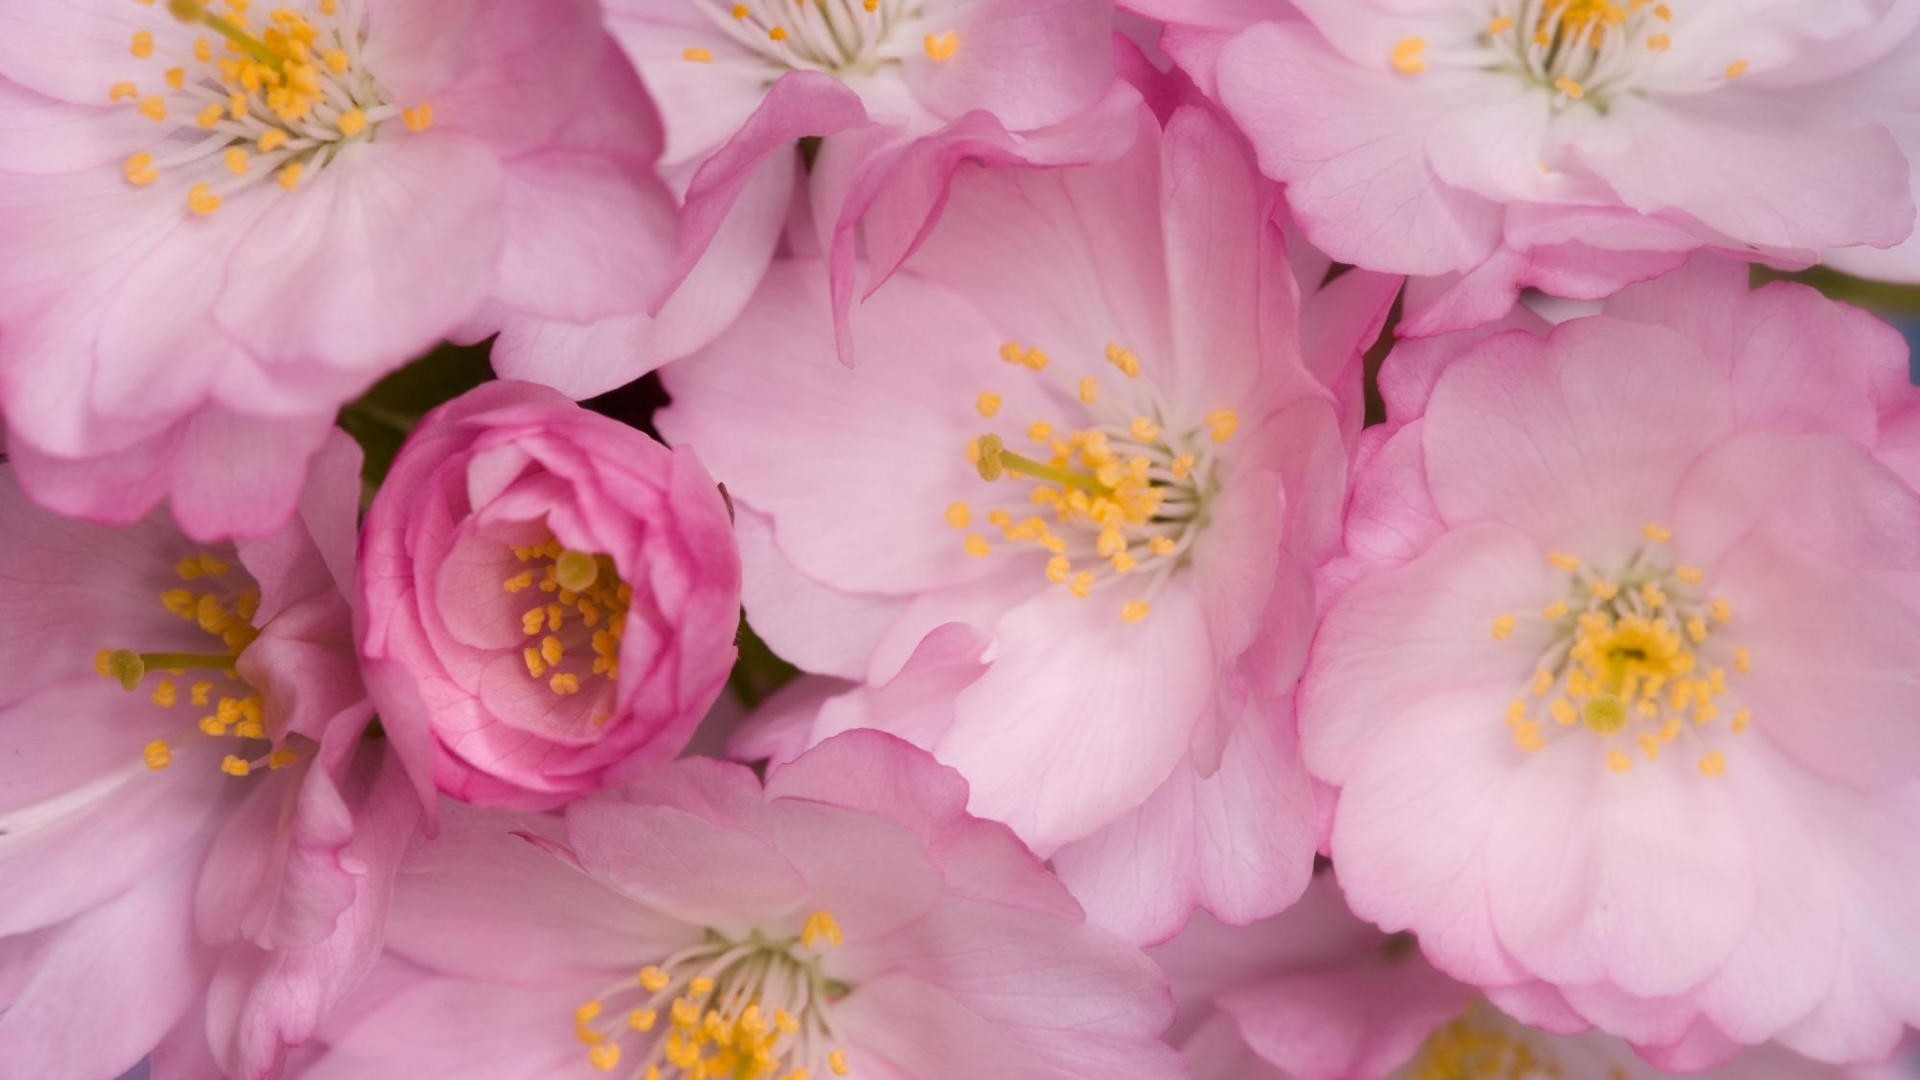 1920x1080 Download Wallpaper  Wild roses, Flowers, Pink, Yellow .